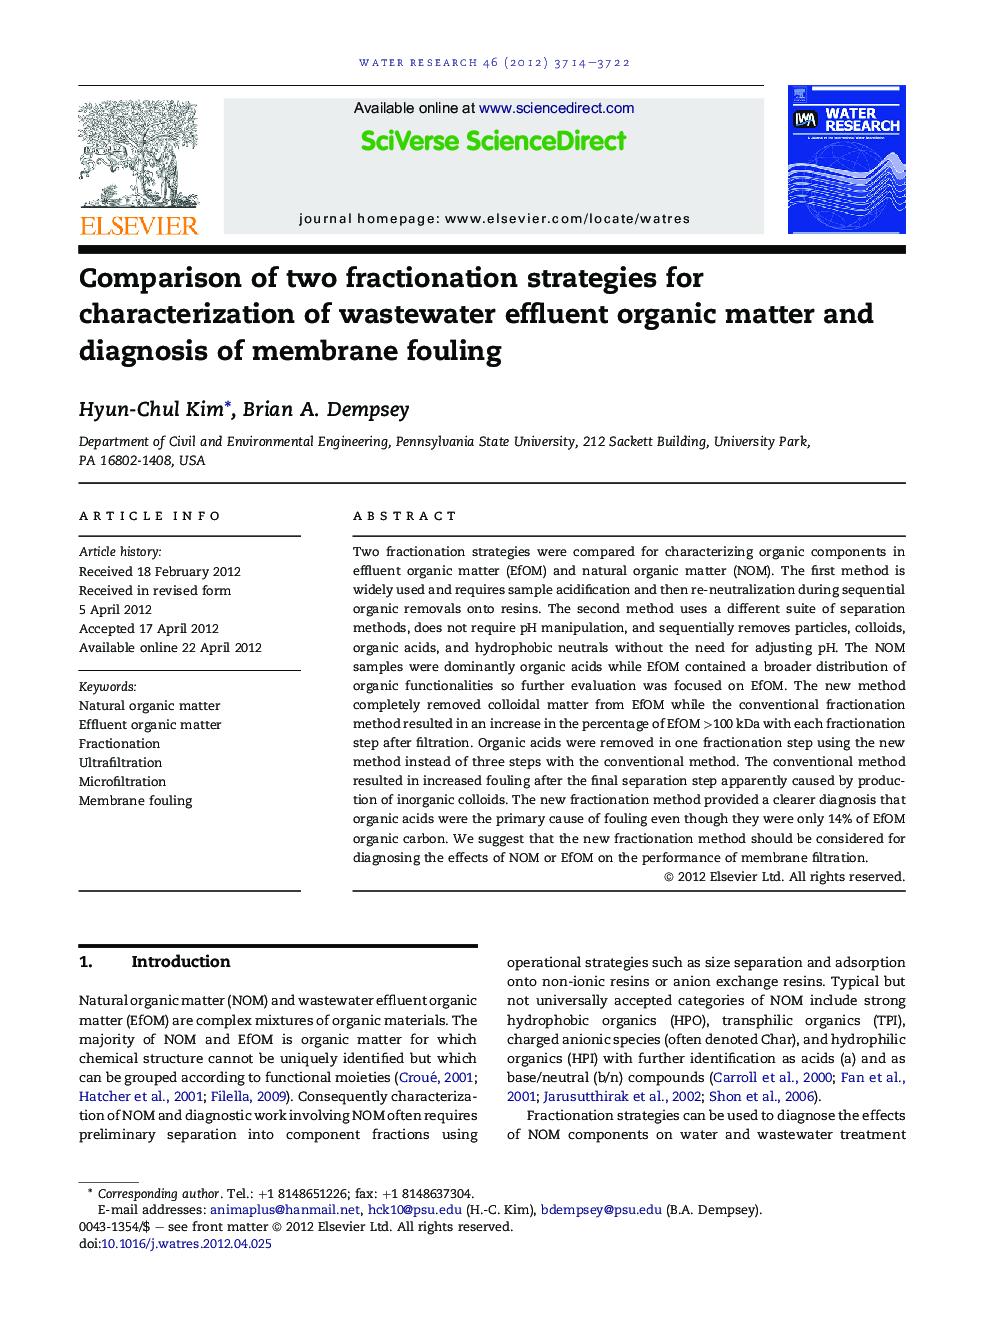 Comparison of two fractionation strategies for characterization of wastewater effluent organic matter and diagnosis of membrane fouling